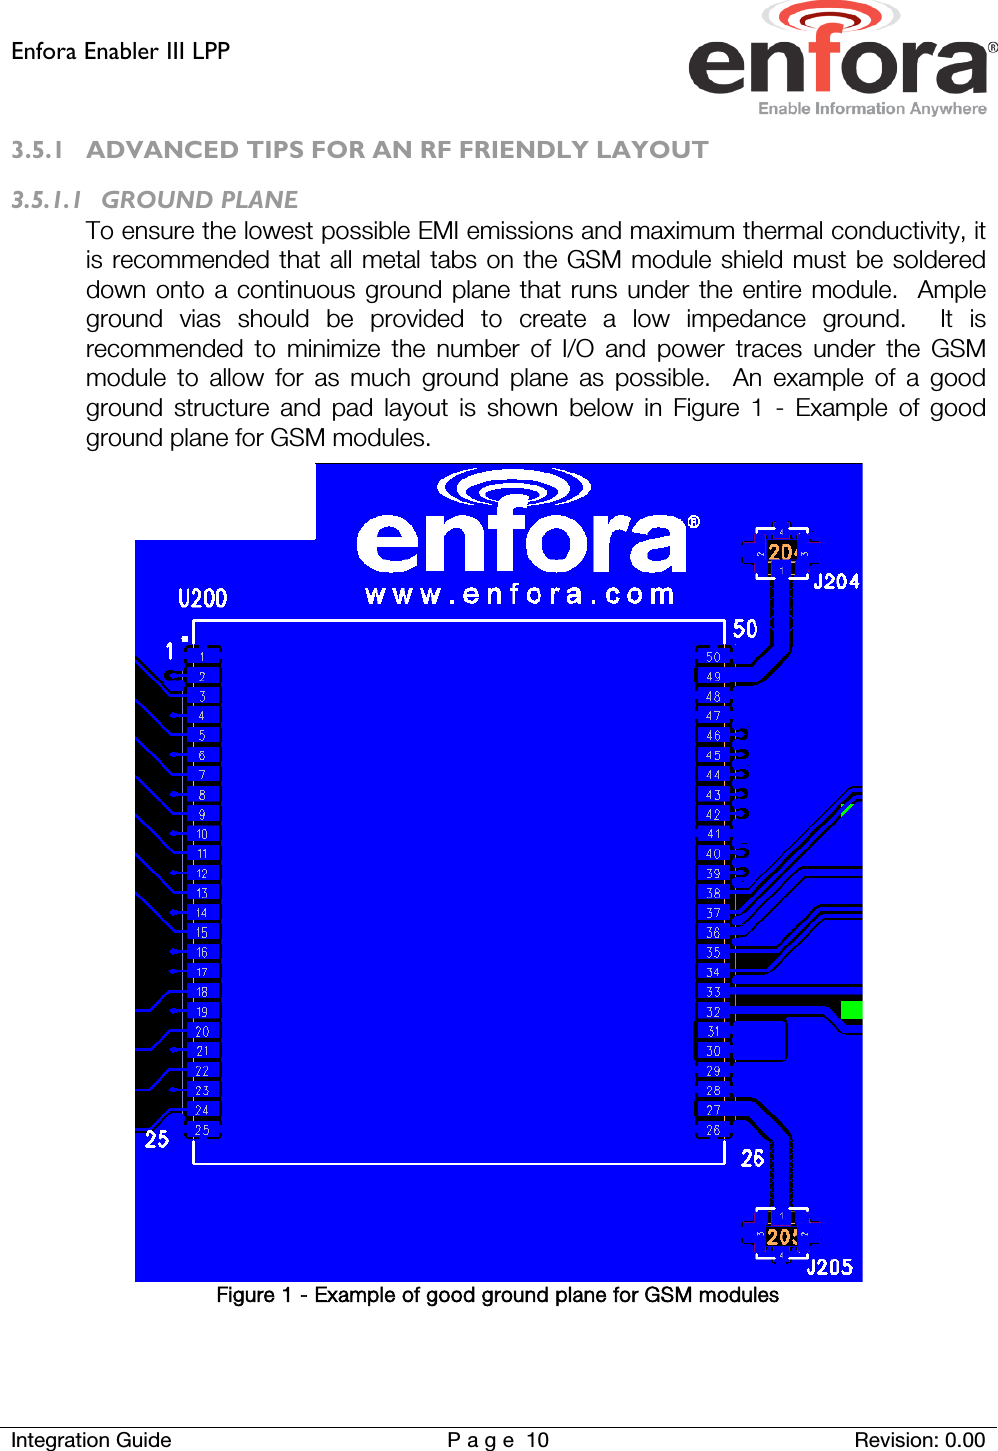 Enfora Enabler III LPP    Integration Guide Page 10 Revision: 0.00  3.5.1 ADVANCED TIPS FOR AN RF FRIENDLY LAYOUT 3.5.1.1 GROUND PLANE To ensure the lowest possible EMI emissions and maximum thermal conductivity, it is recommended that all metal tabs on the GSM module shield must be soldered down onto a continuous ground plane that runs under the entire module.  Ample ground vias should be provided to create a low impedance ground.  It is recommended to minimize the number of I/O and power traces under the GSM module to allow for as much ground plane as possible.  An example of a good ground structure and pad layout is shown below in Figure 1 -  Example of good ground plane for GSM modules.  Figure 1 - Example of good ground plane for GSM modules   